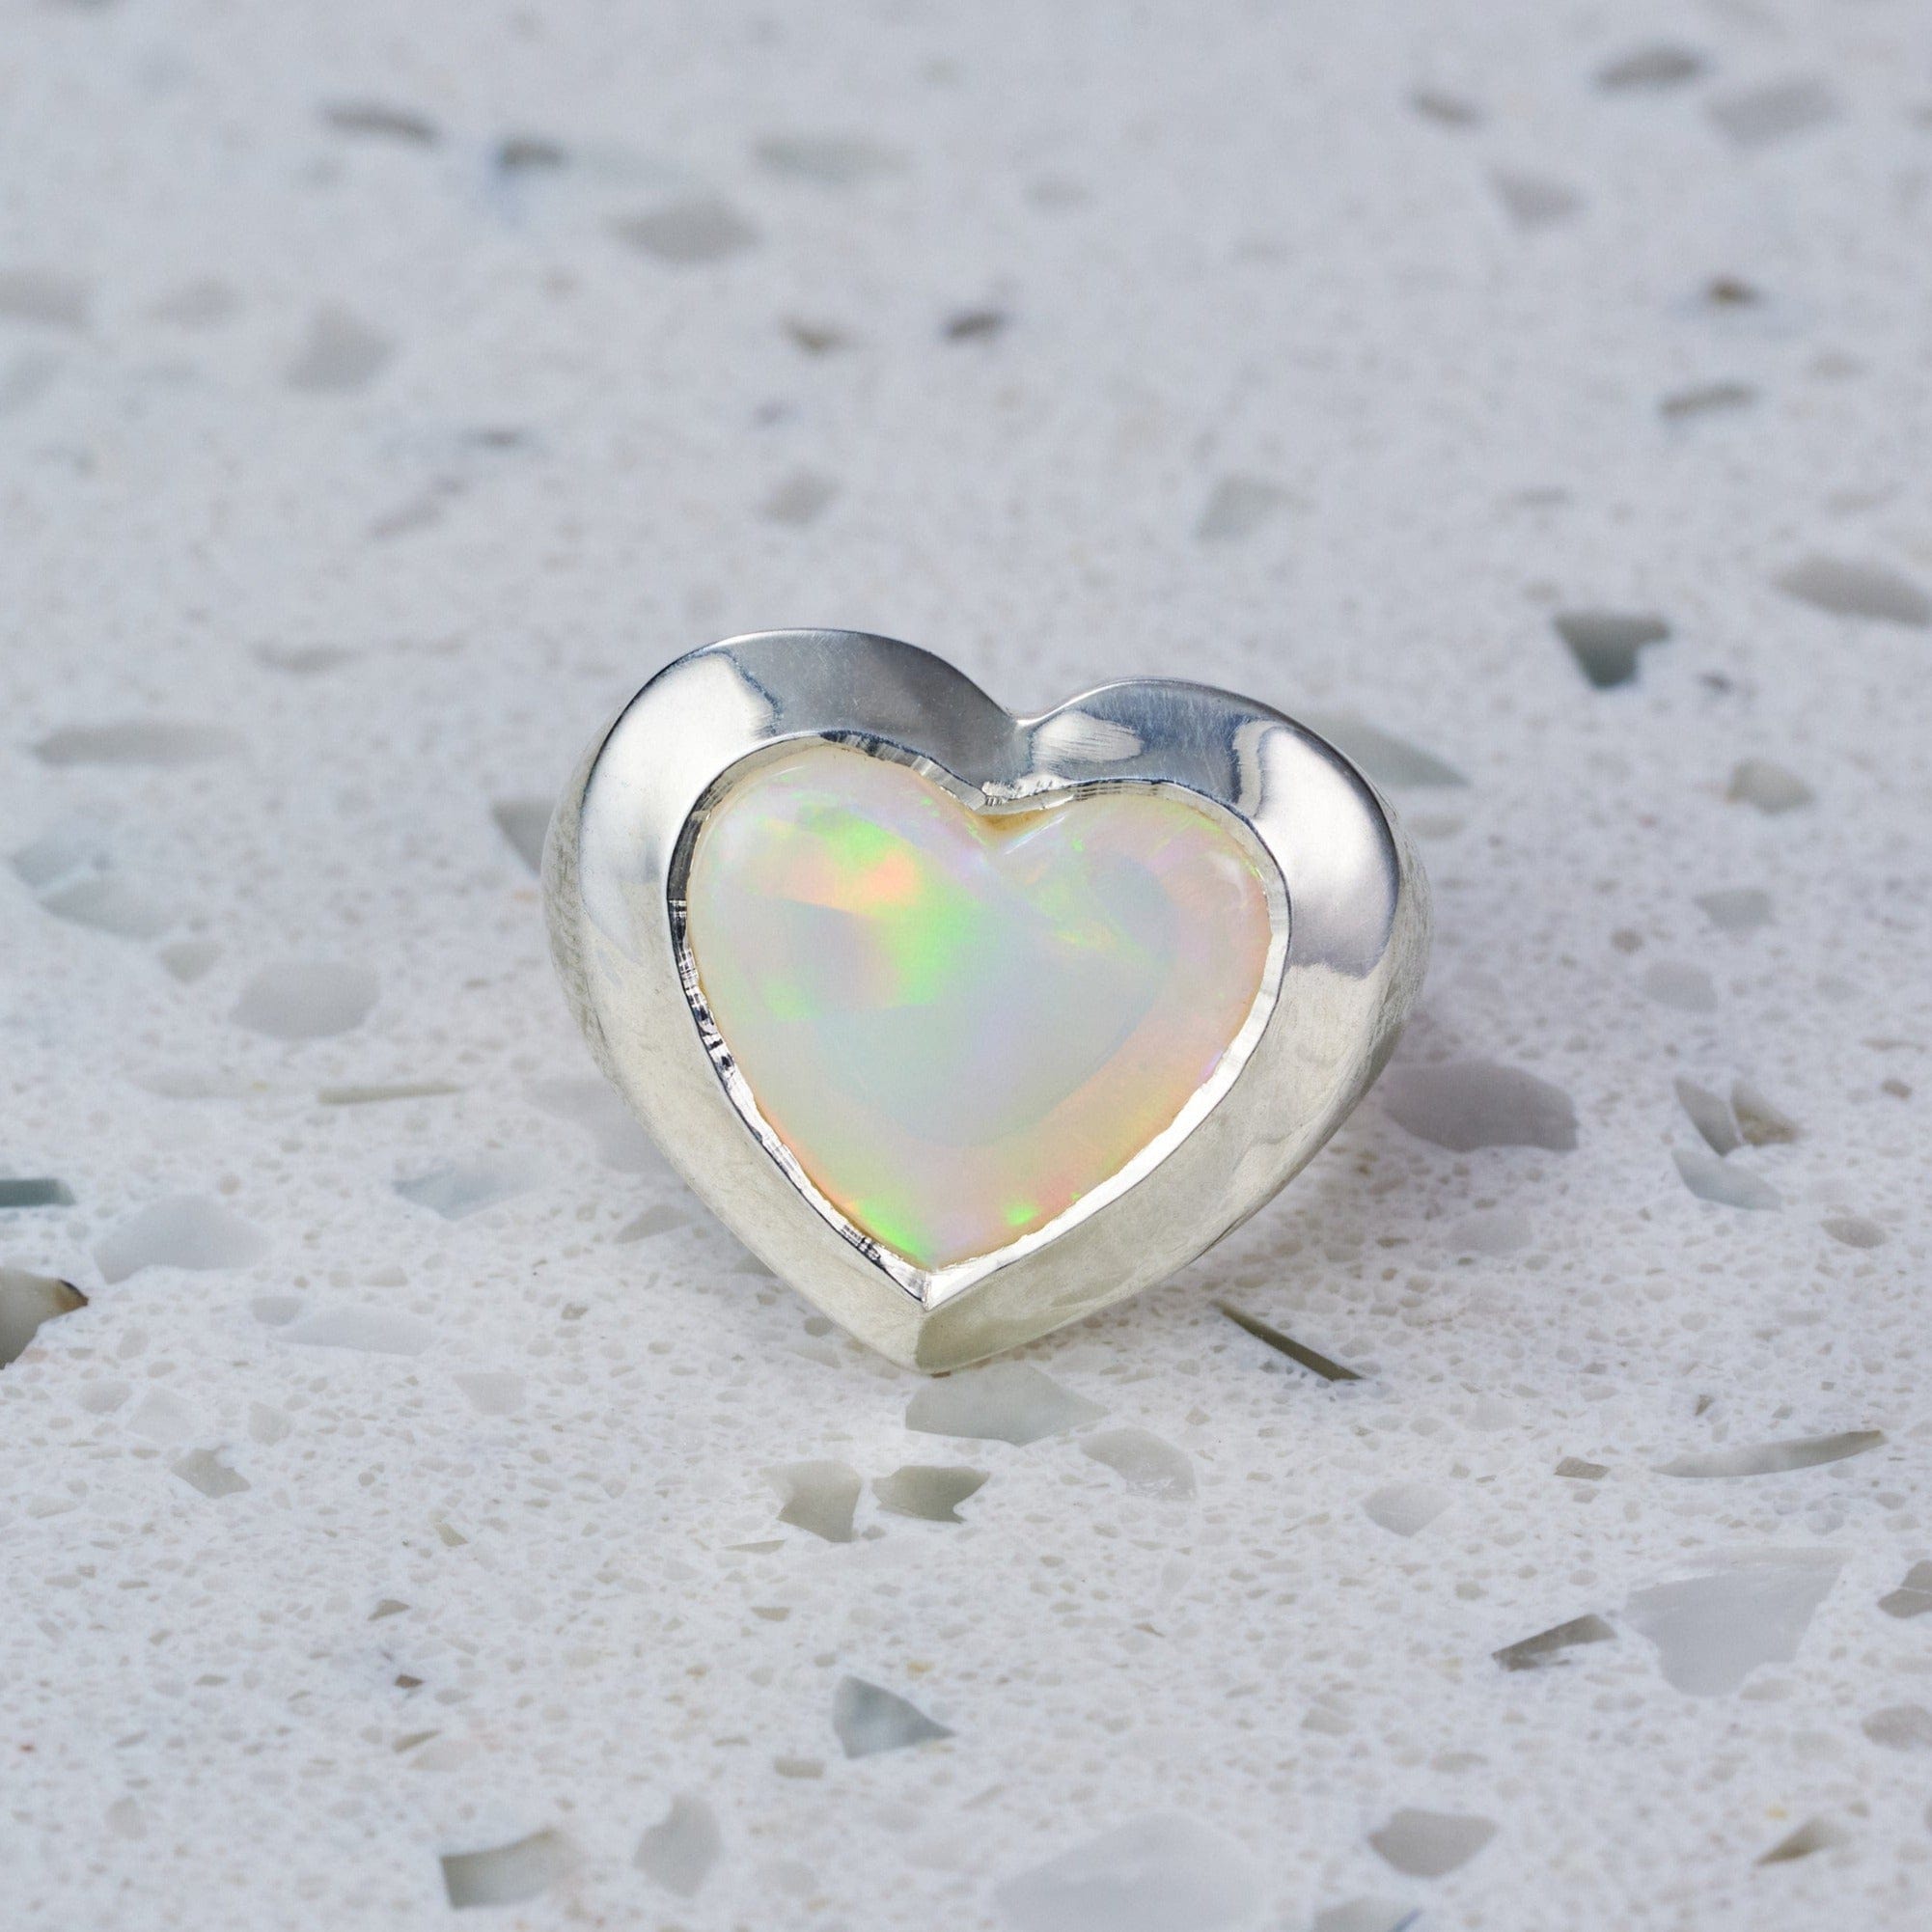 Luxury Promise Heart Shaped Crystal White Opal set in Silver